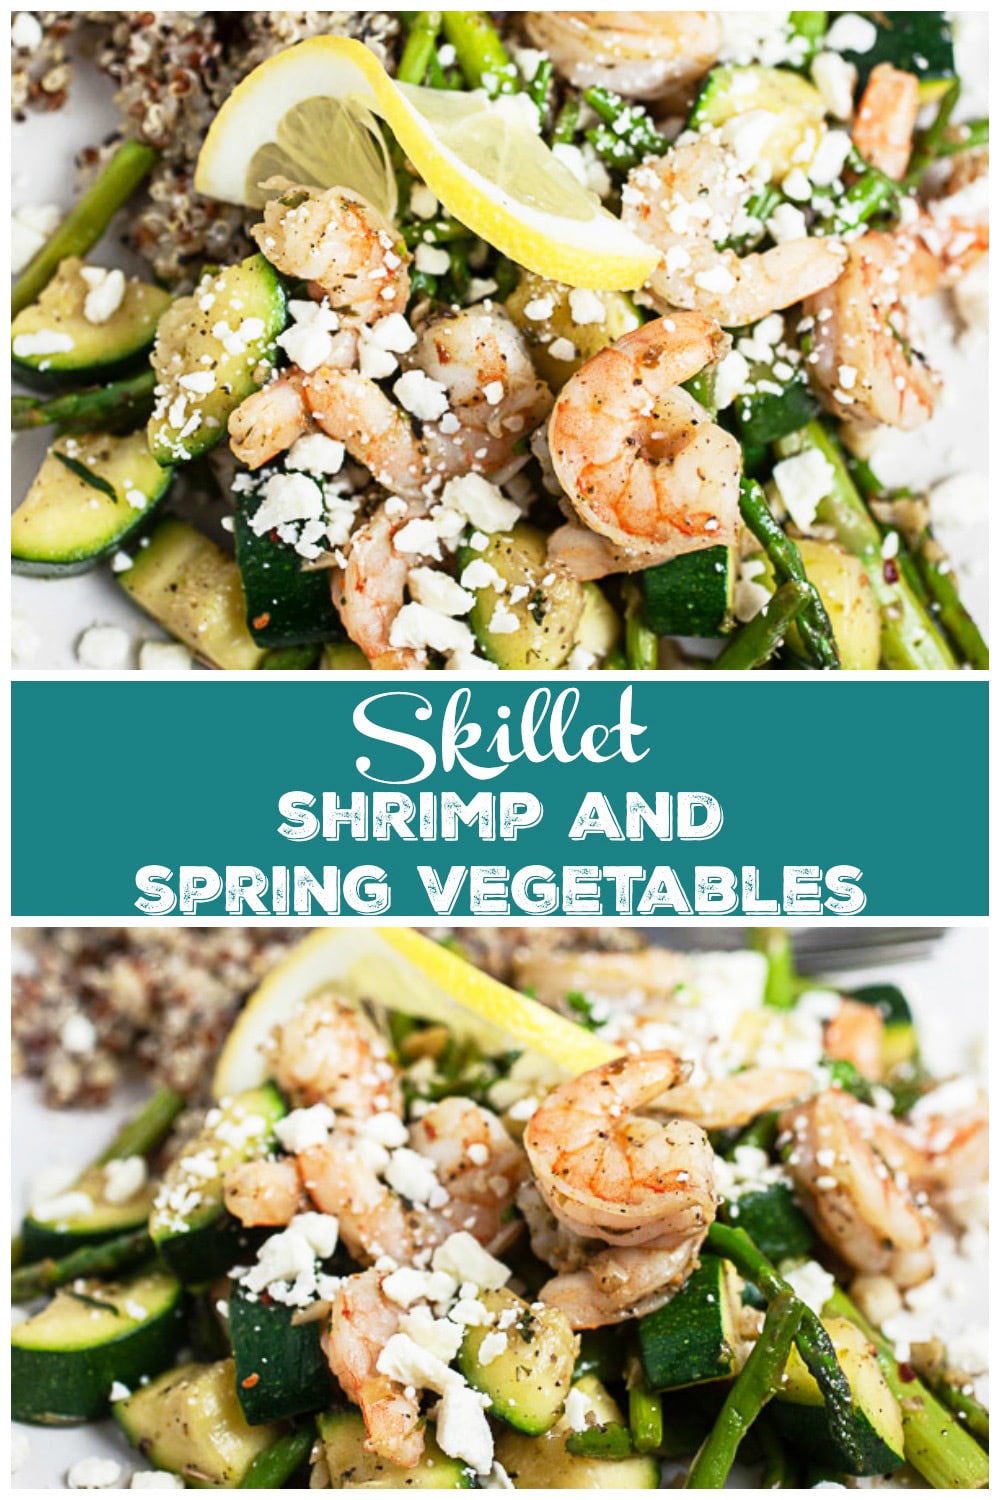 Skillet Shrimp with Vegetables and Feta | The Rustic Foodie®